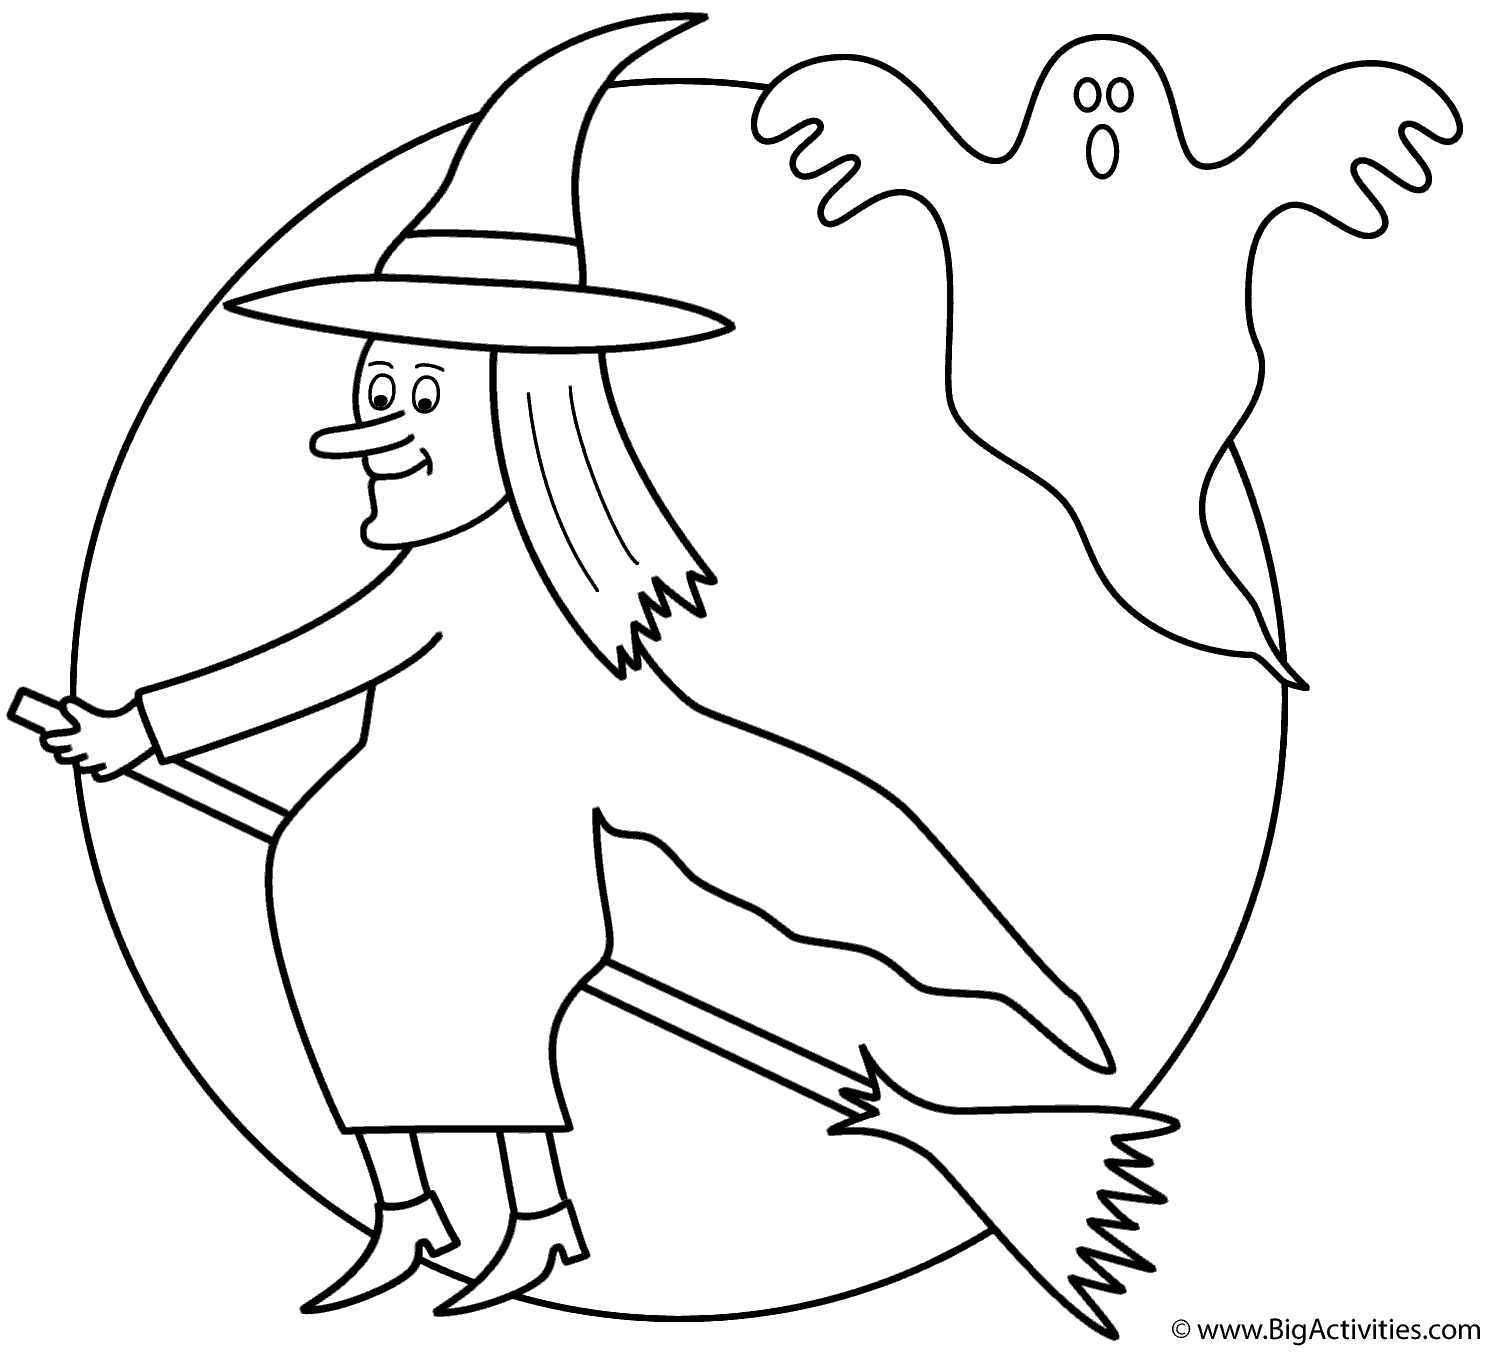 Witch on broom with the moon and ghost - Coloring Page (Halloween)